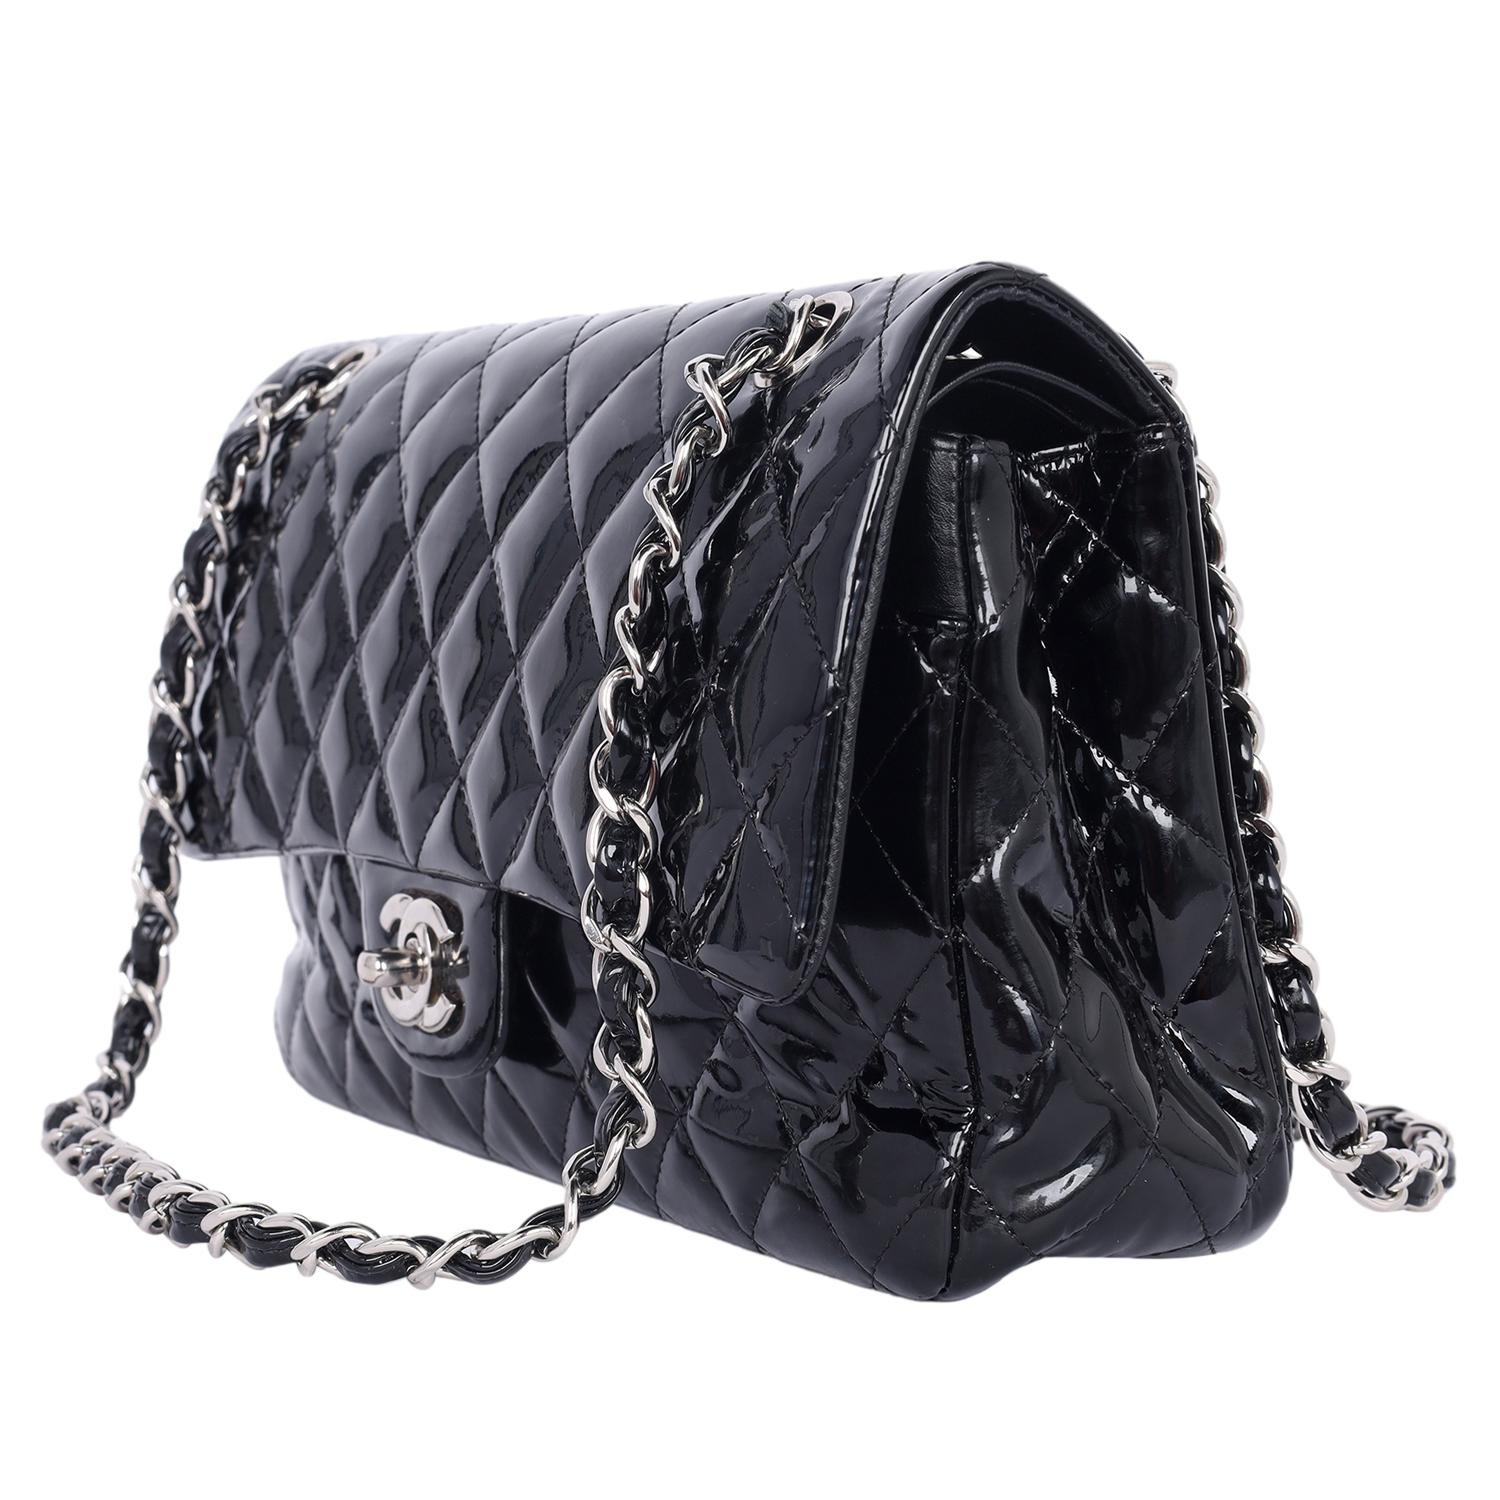 Chanel Double Flap Patent Leather Shoulder Bag Black In Good Condition For Sale In Salt Lake Cty, UT